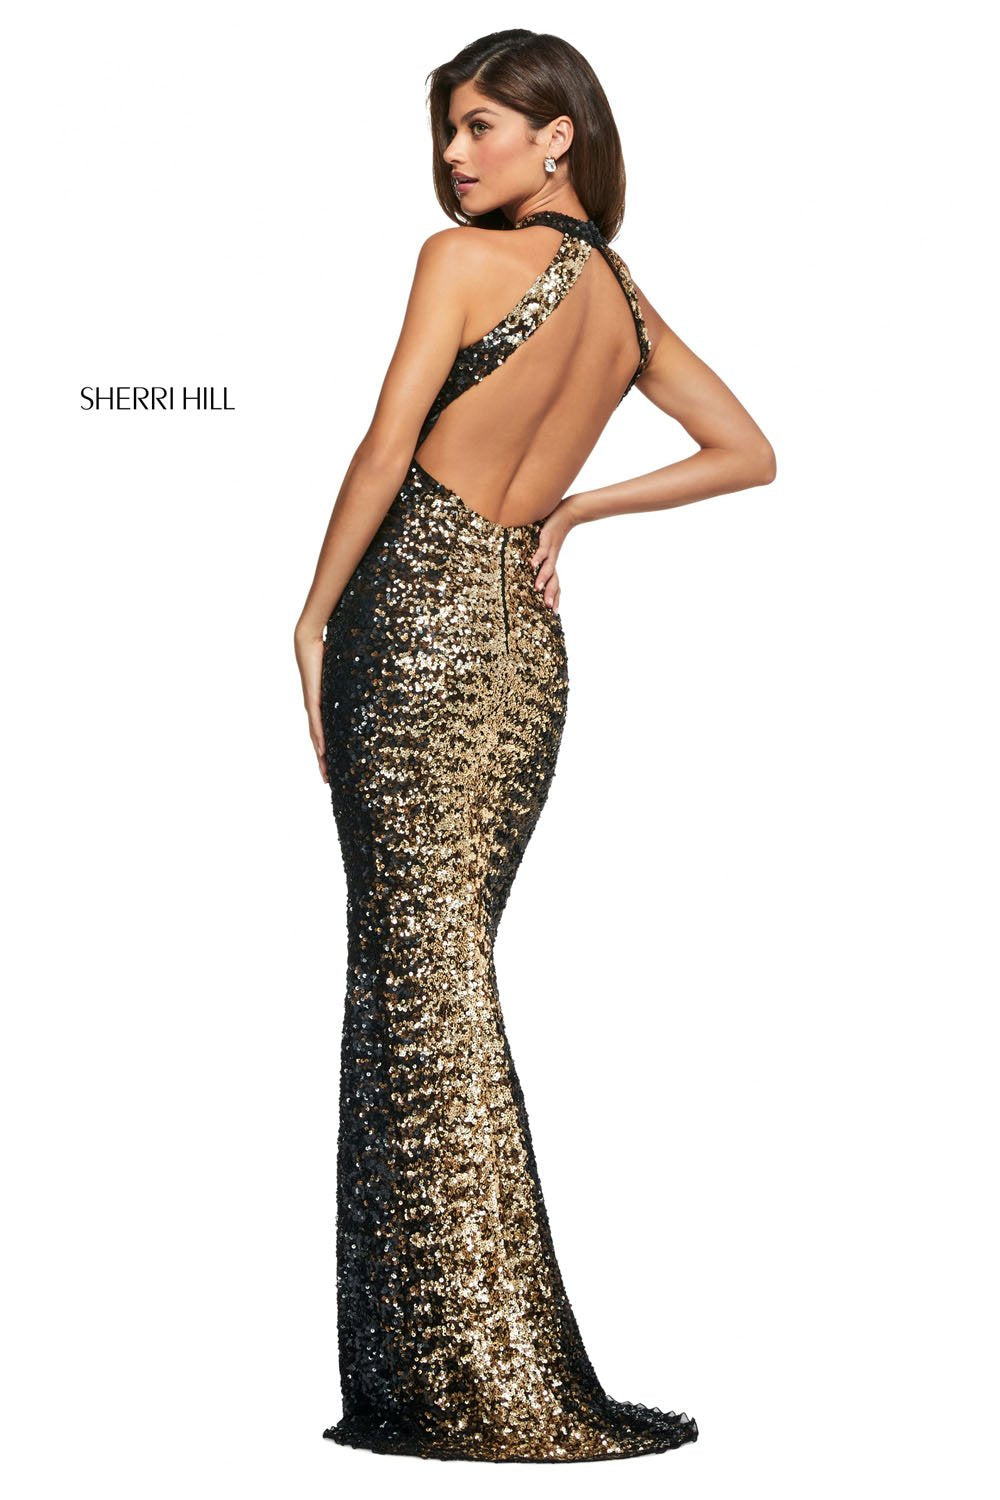 Sherri Hill 53667 dress images in these colors: Black Copper Gold.